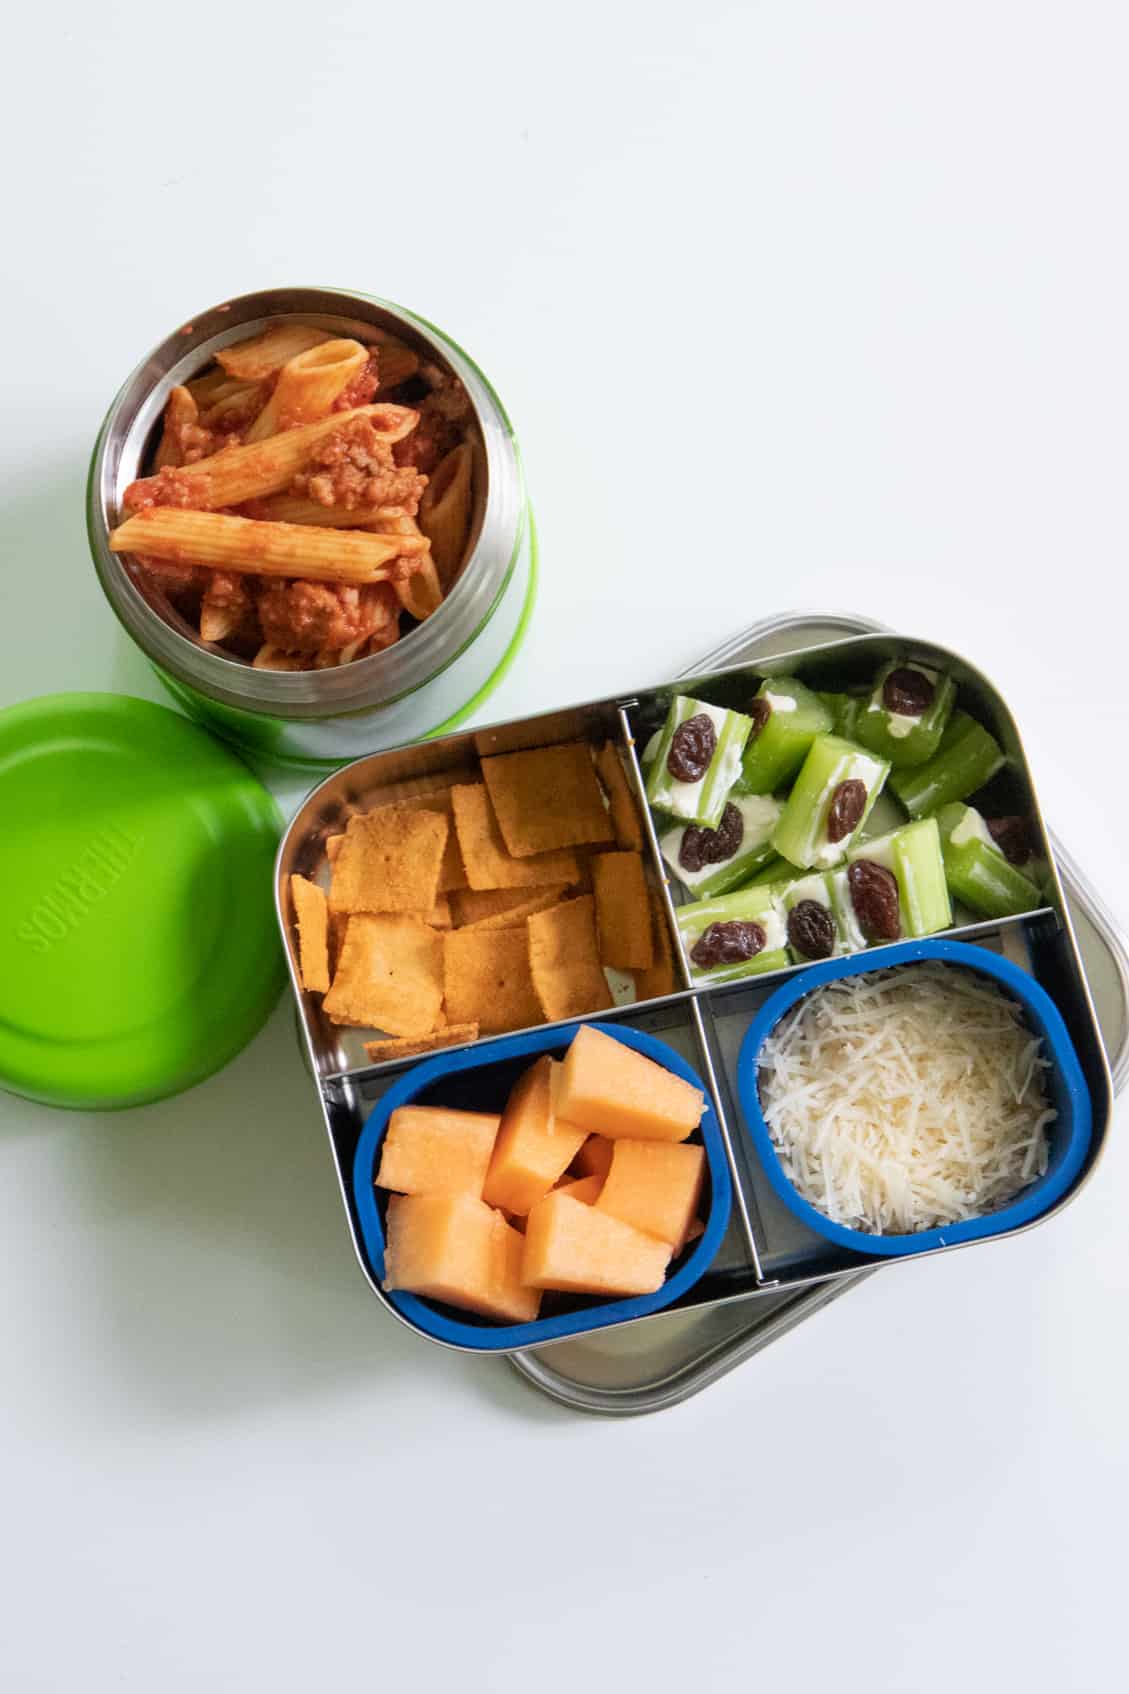 Stainless steel lunch box with cantaloupe, ants on a log, and crackers next to a Thermos of penne in meat sauce.